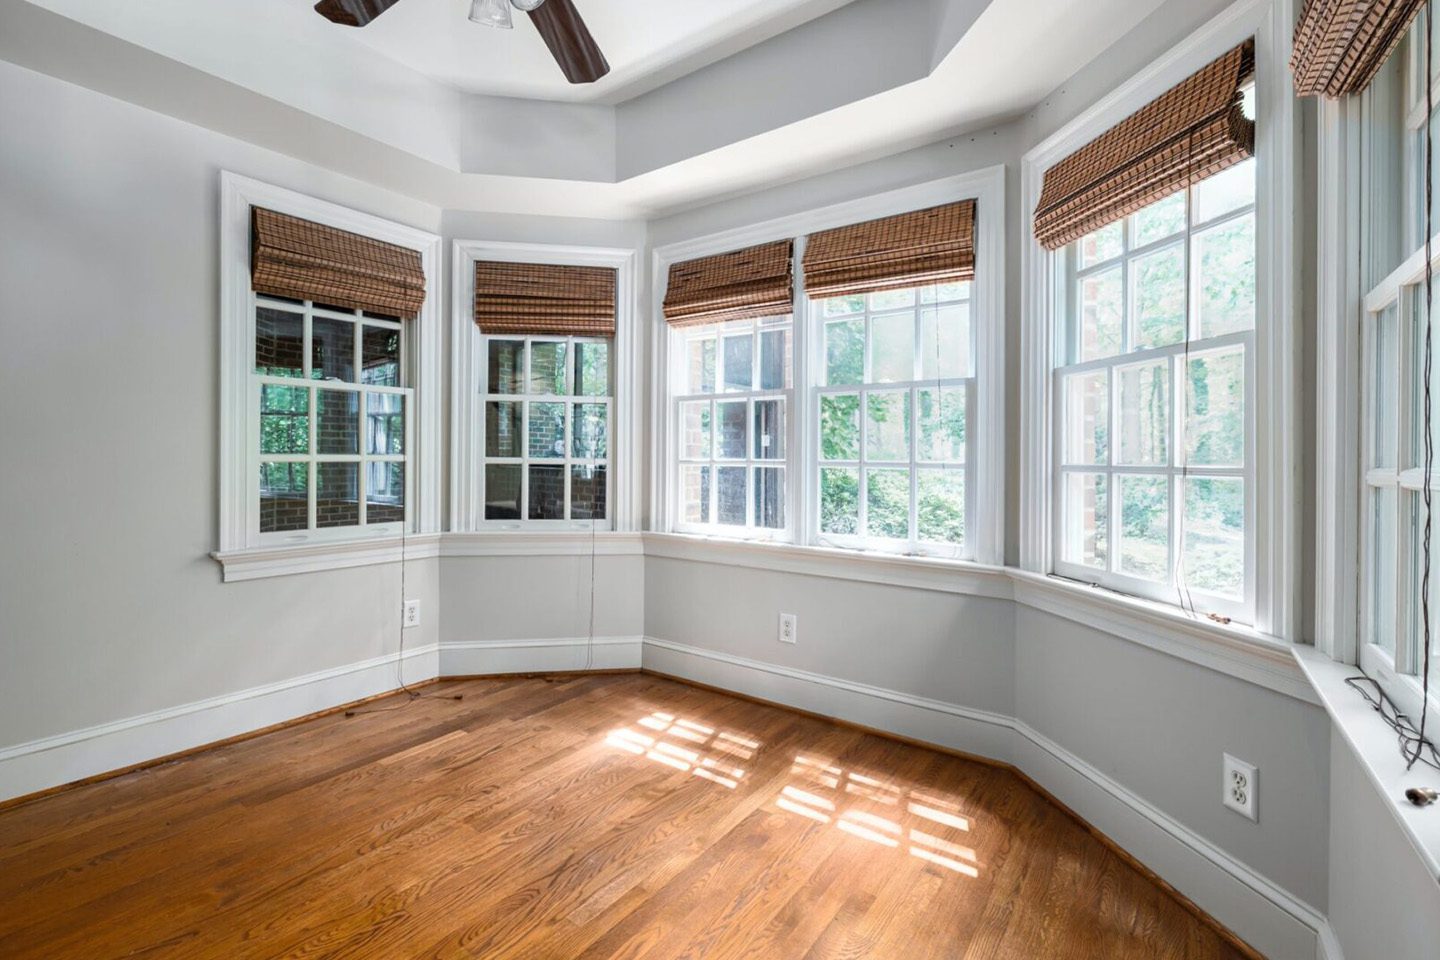 A room with many windows and wooden floors